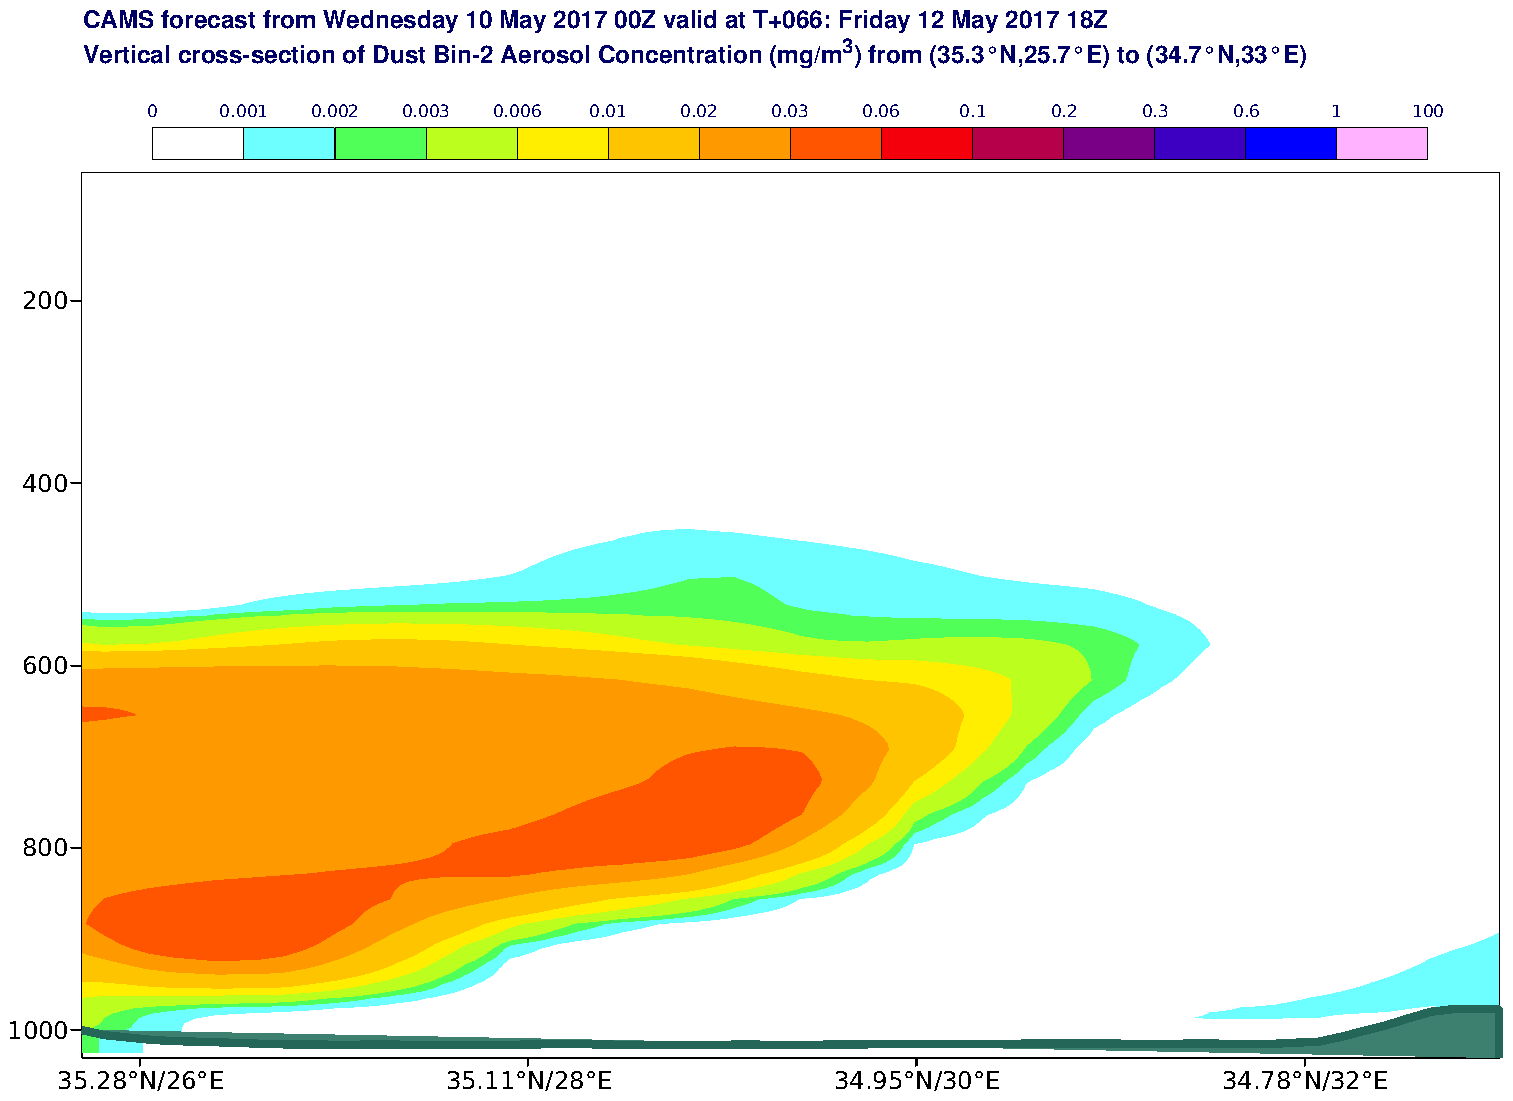 Vertical cross-section of Dust Bin-2 Aerosol Concentration (mg/m3) valid at T66 - 2017-05-12 18:00